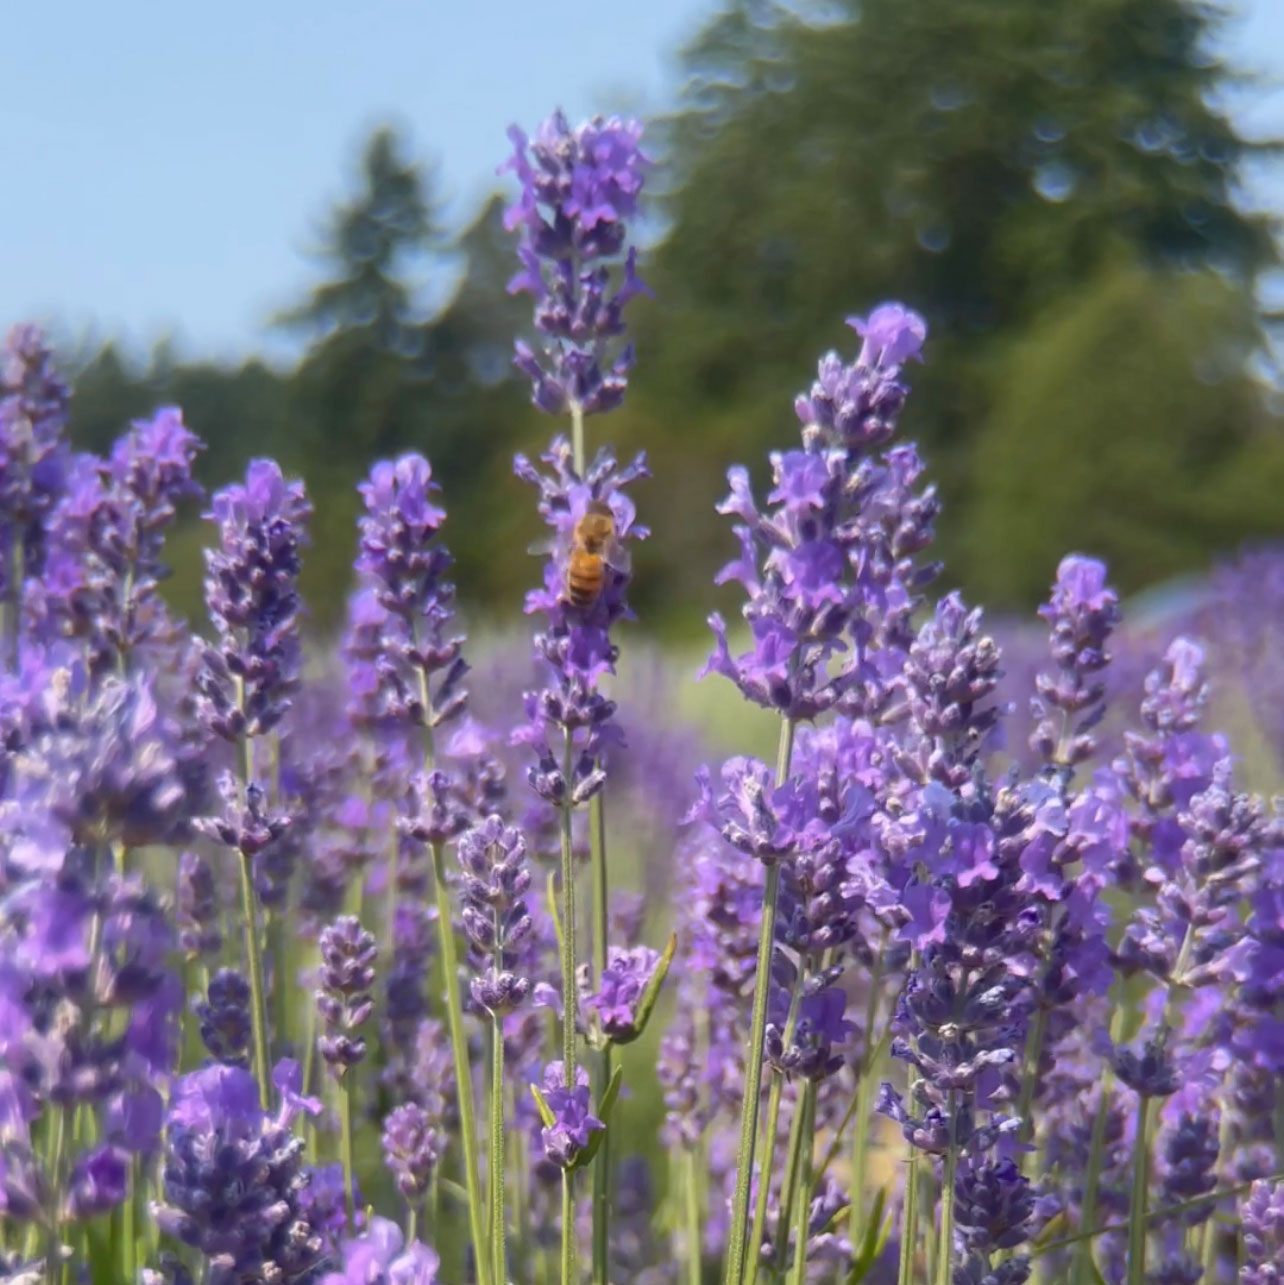 For the Love of Lavender